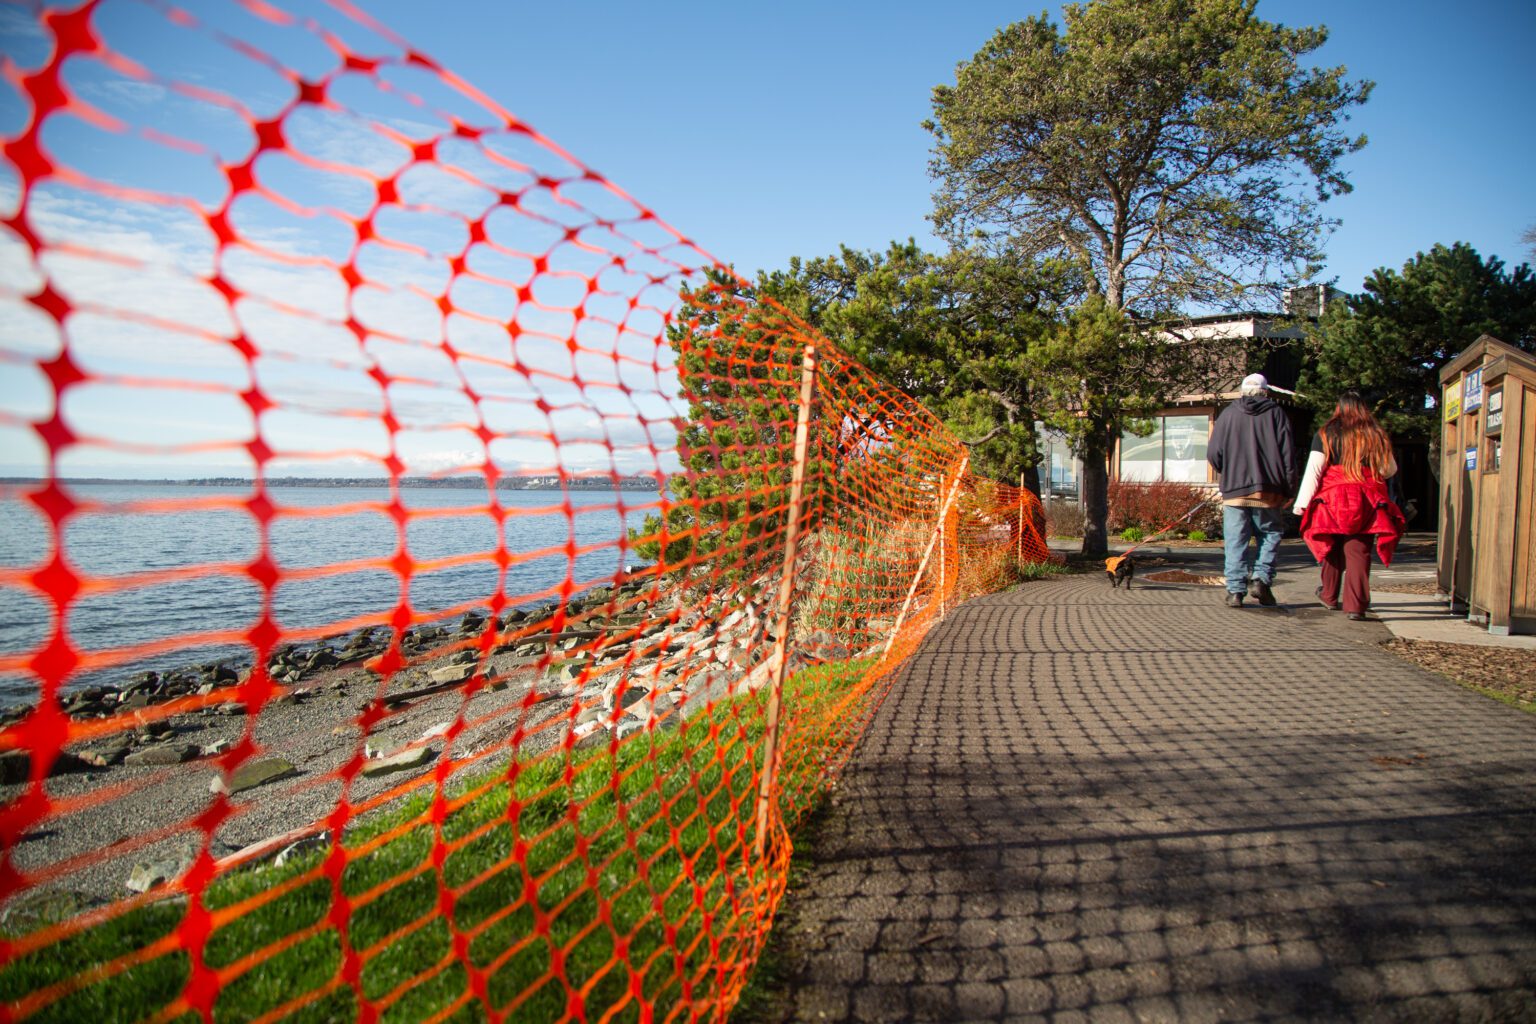 Orange netting blocks off the shoreline at Boulevard Park on March 28. The City of Bellingham expects to receive $500